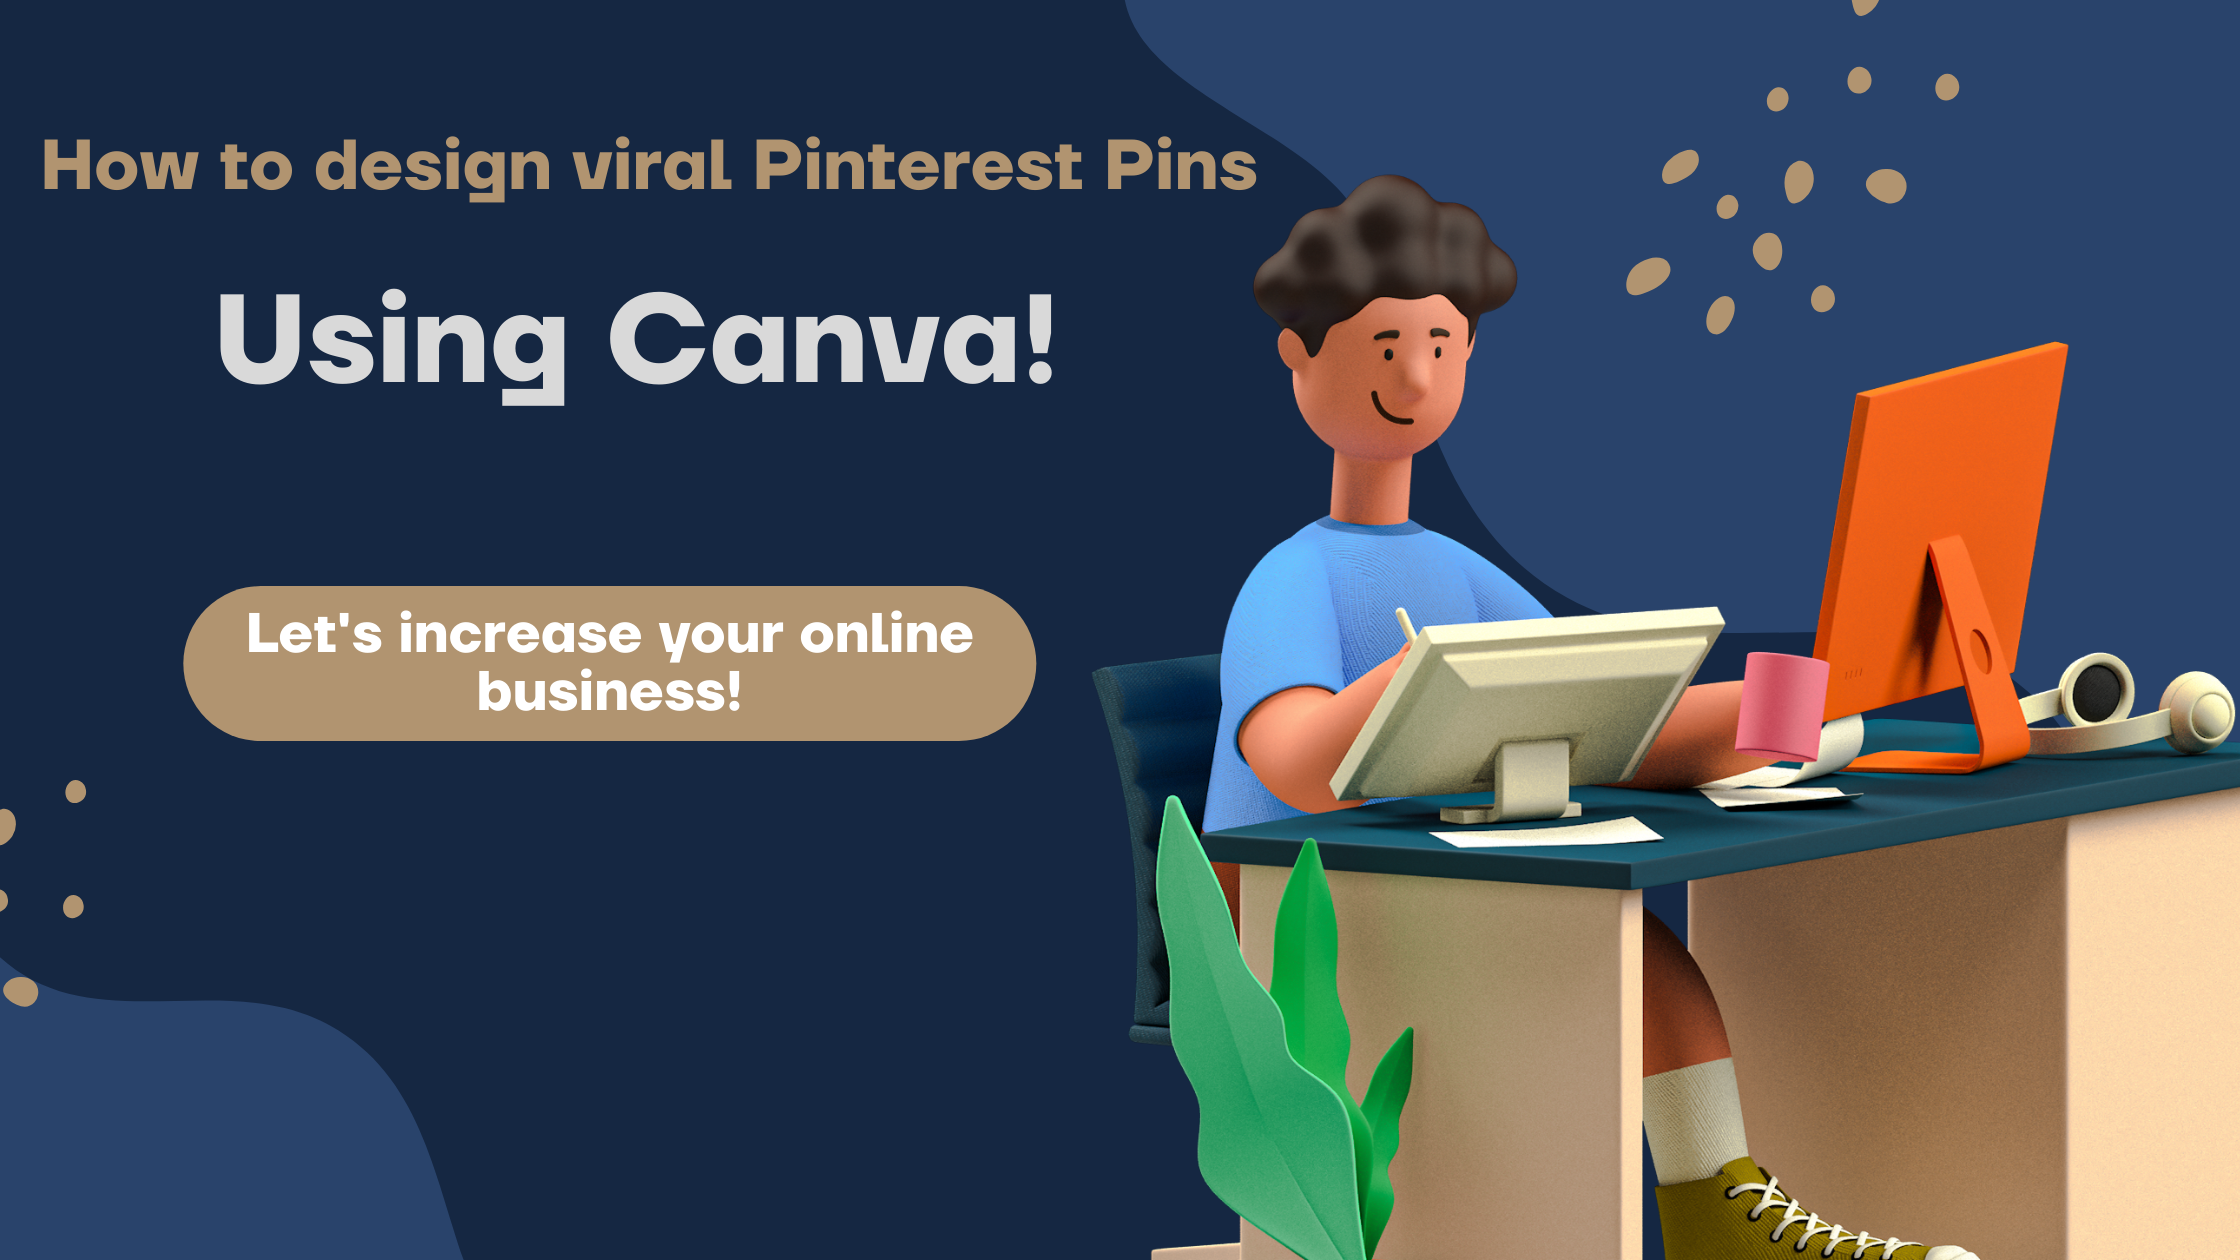 Effortlessly design viral Pinterest pins to grow your business